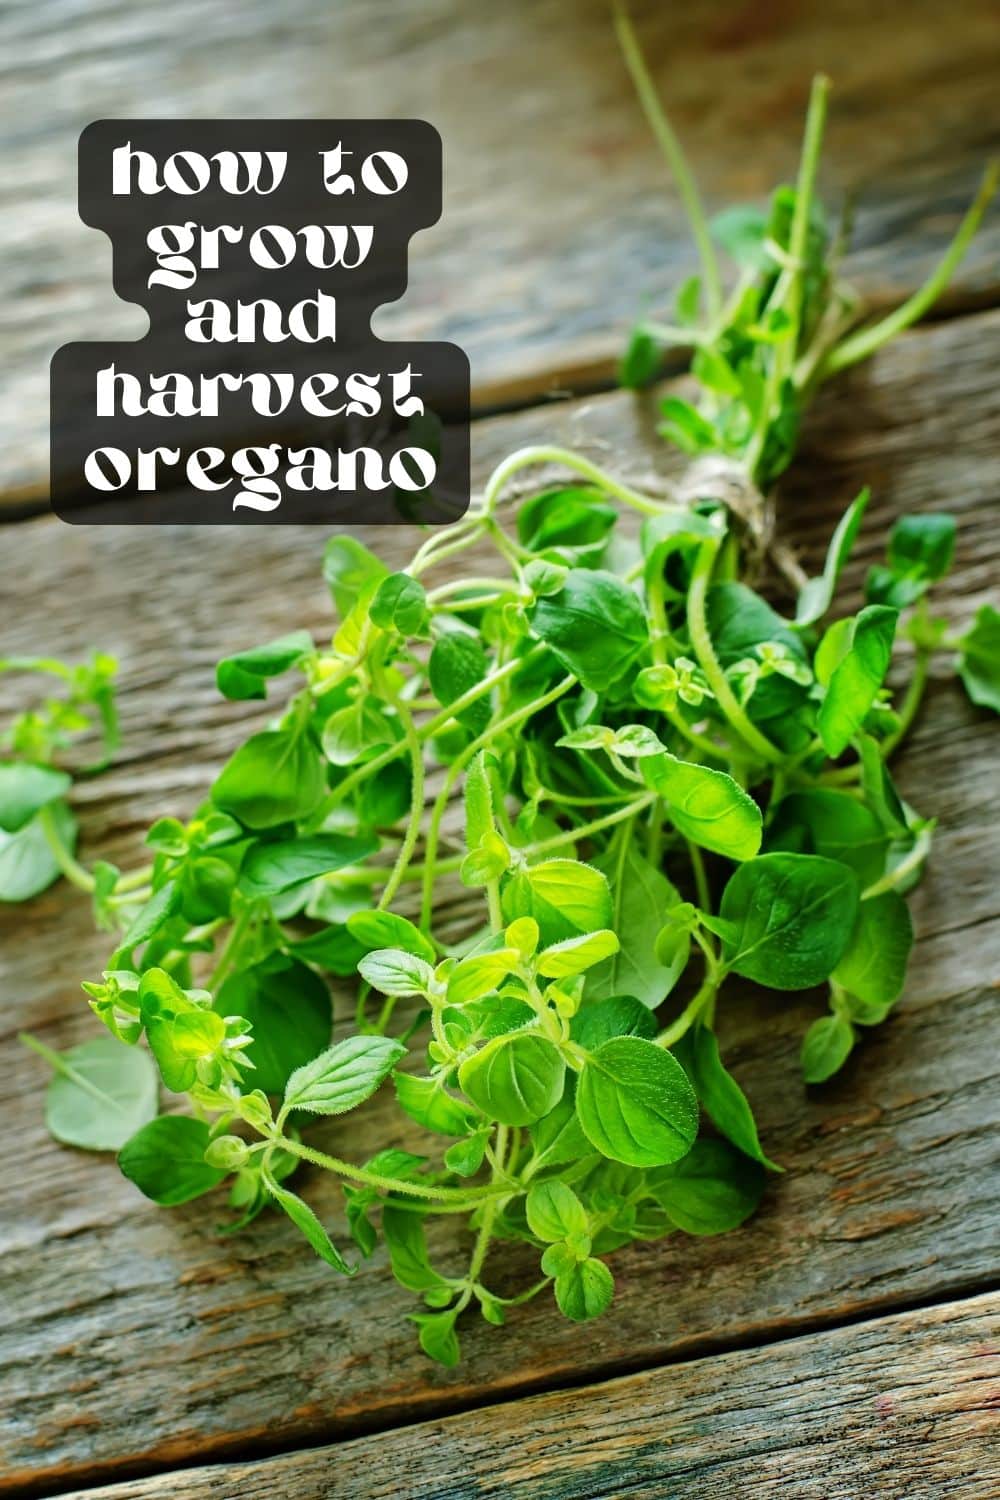 Growing oregano at home couldn't be easier. It grows well outside and indoors and requires very little maintenance! Add some oregano to your existing herb garden or start a new one, and enjoy fresh, fragrant oregano anytime.